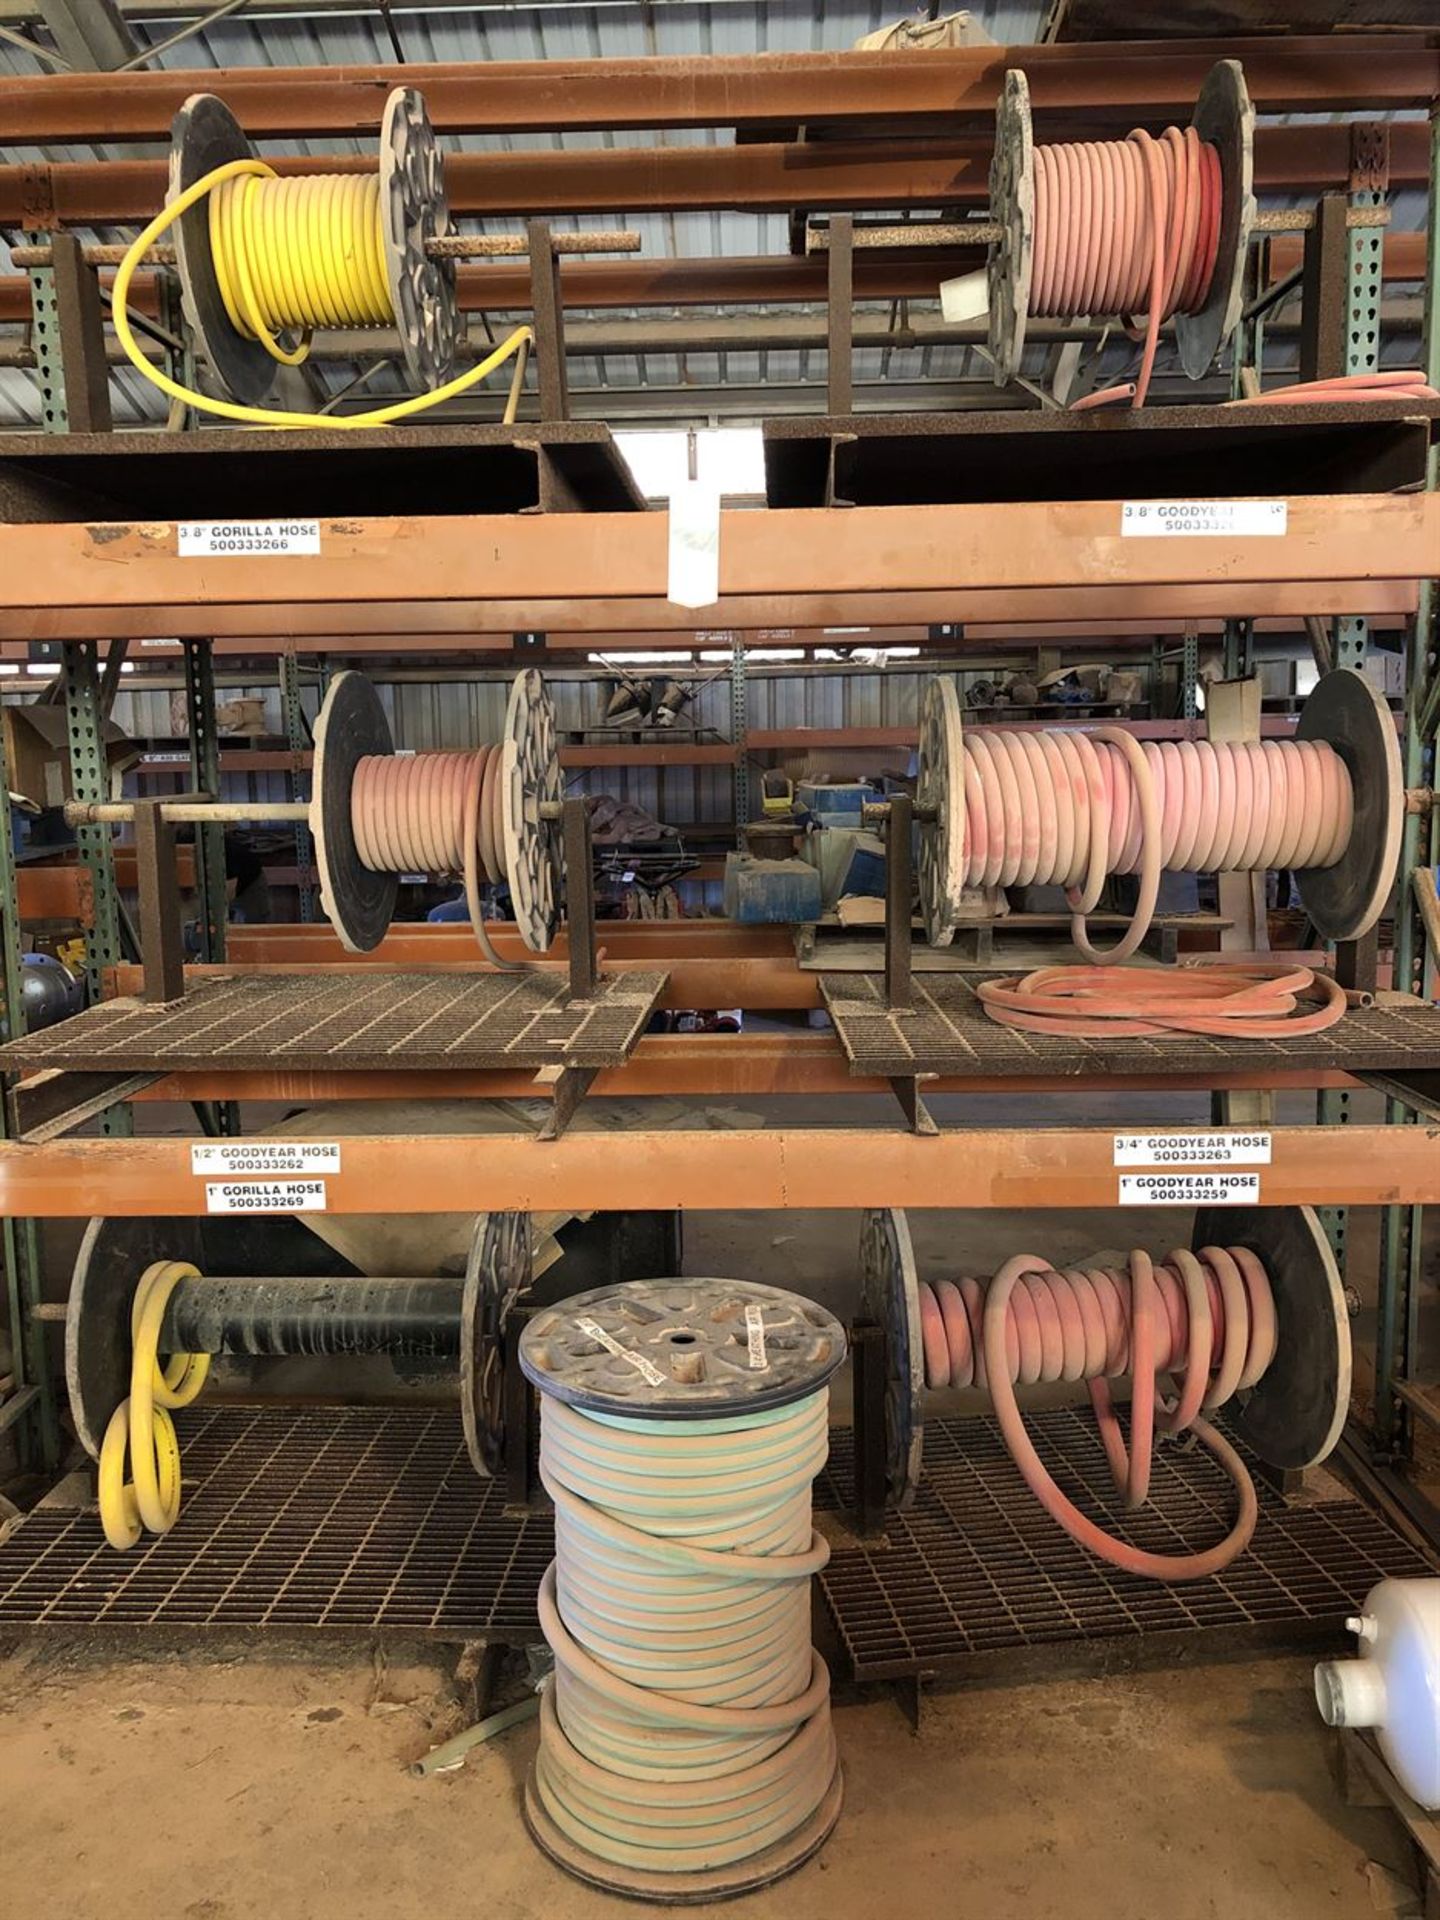 Lot Comprising of Assorted Spools of Hose, Including 3/4, 1,2, and 1" Hose (Location: Chemical